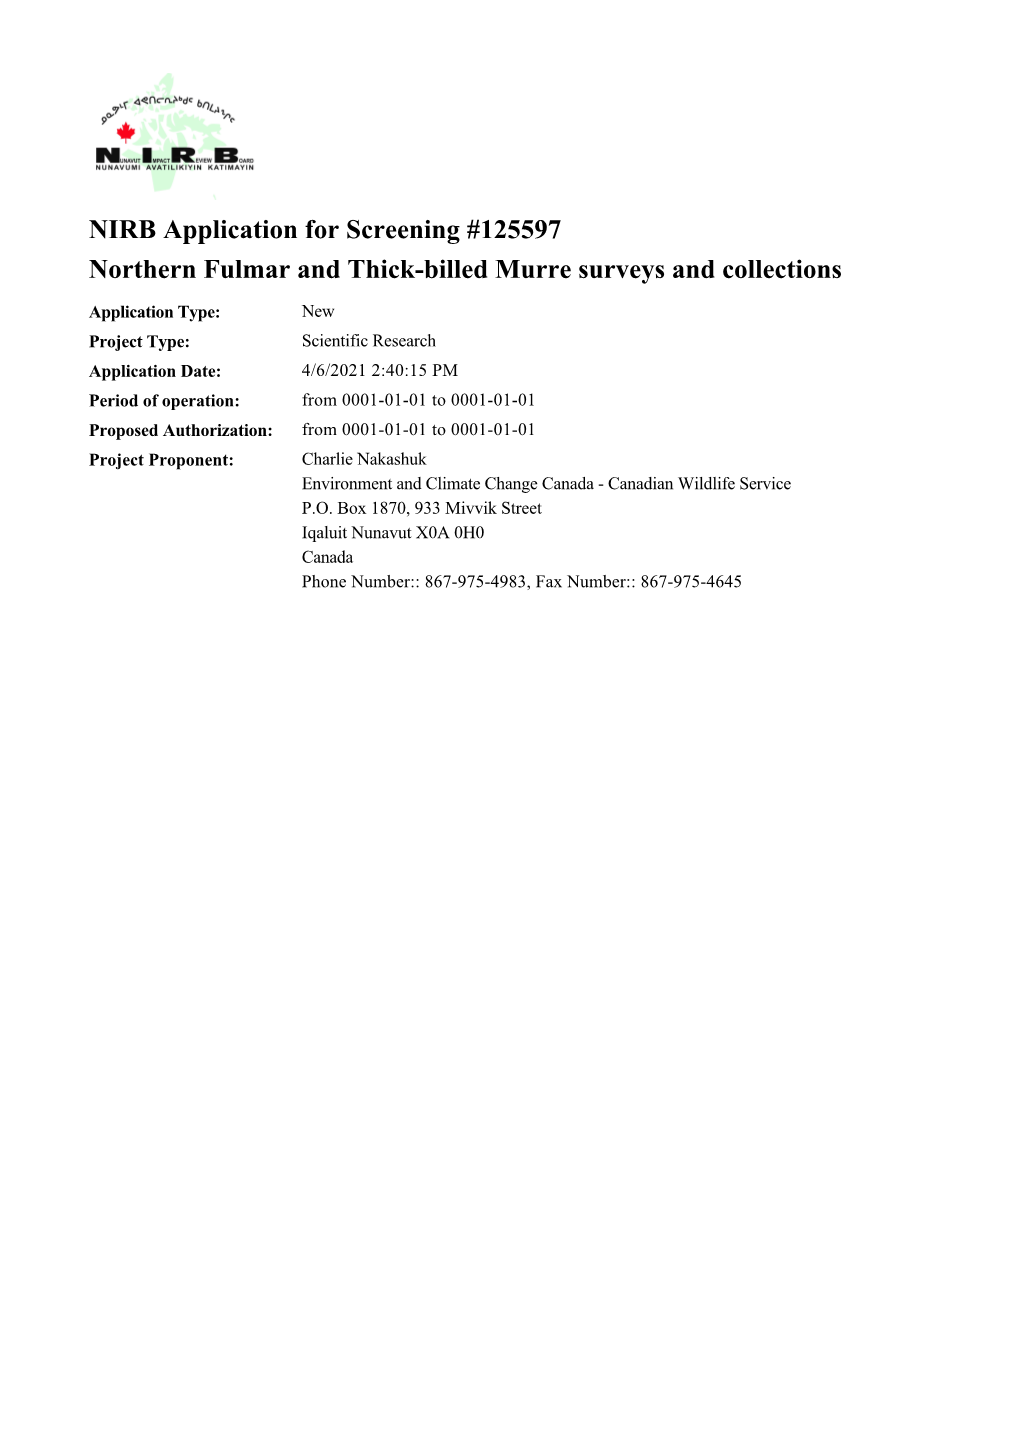 NIRB Application for Screening #125597 Northern Fulmar and Thick-Billed Murre Surveys and Collections